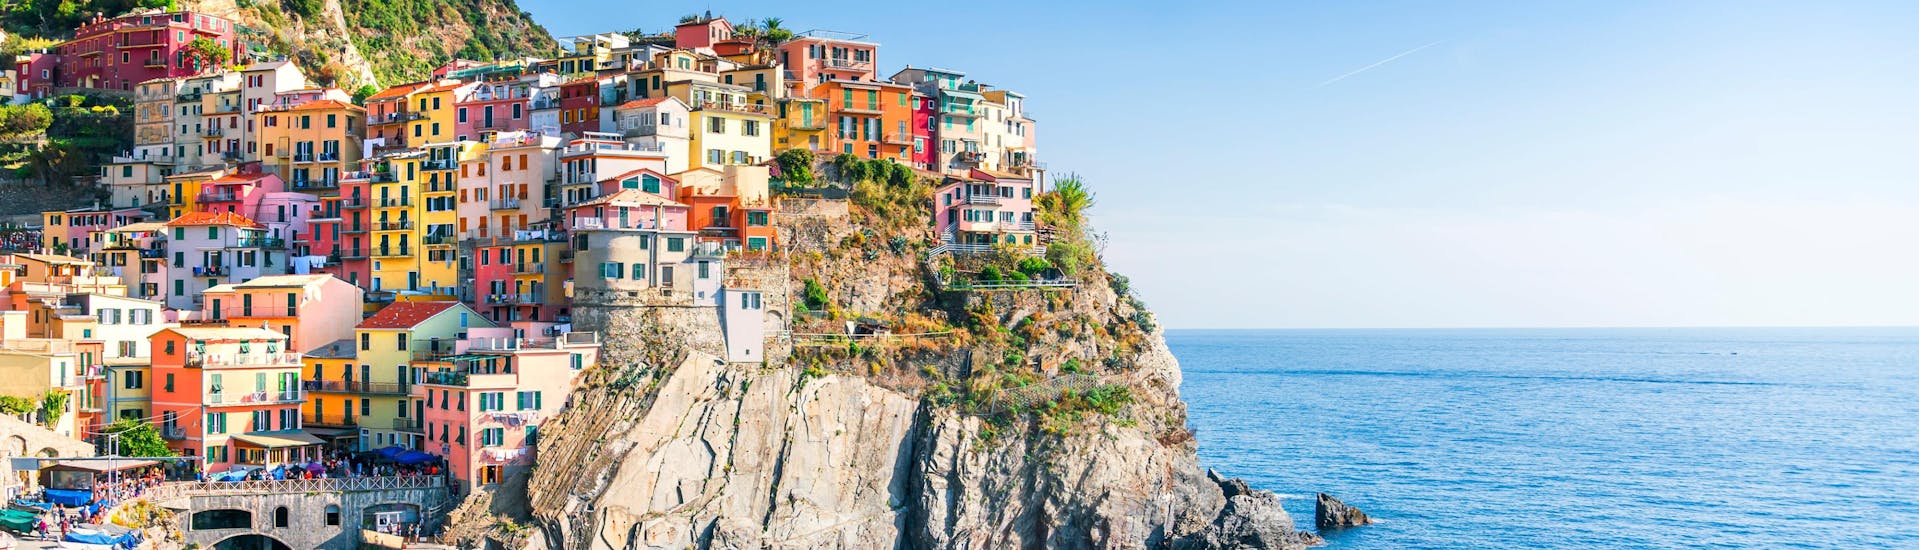 An image of the picturesque little village of Manarola perched on top of the cliffs, one of the sights afforded to those who go on a boat trip along the Cinque Terre coast.